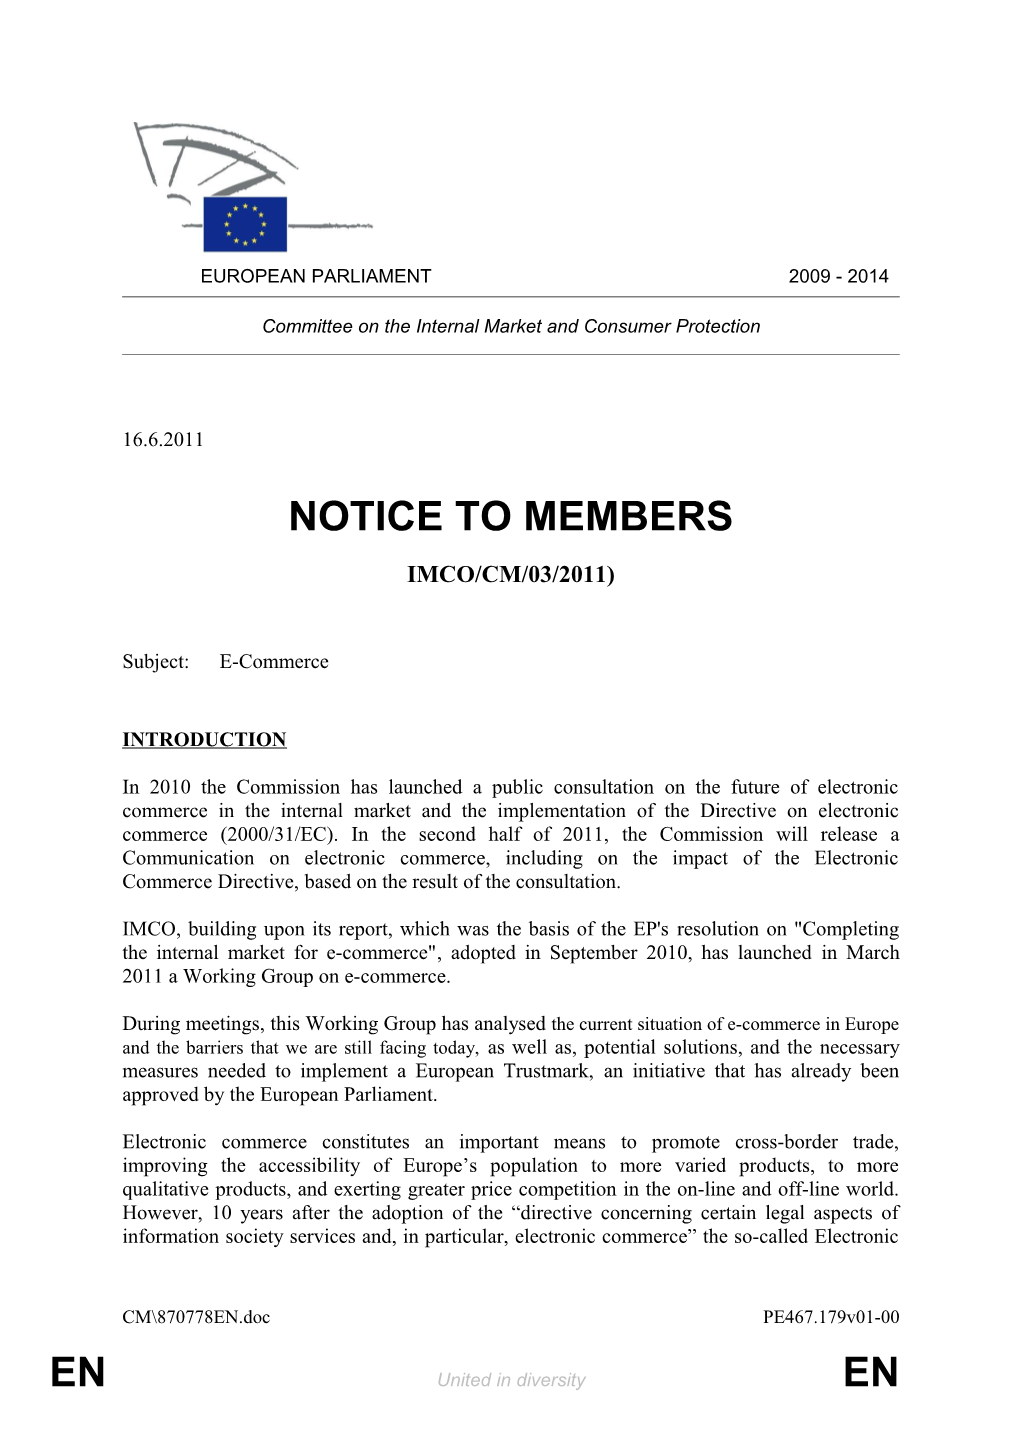 Commission&gt; IMCO Committee on the Internal Market and Consumer Protection&lt;/ Commission